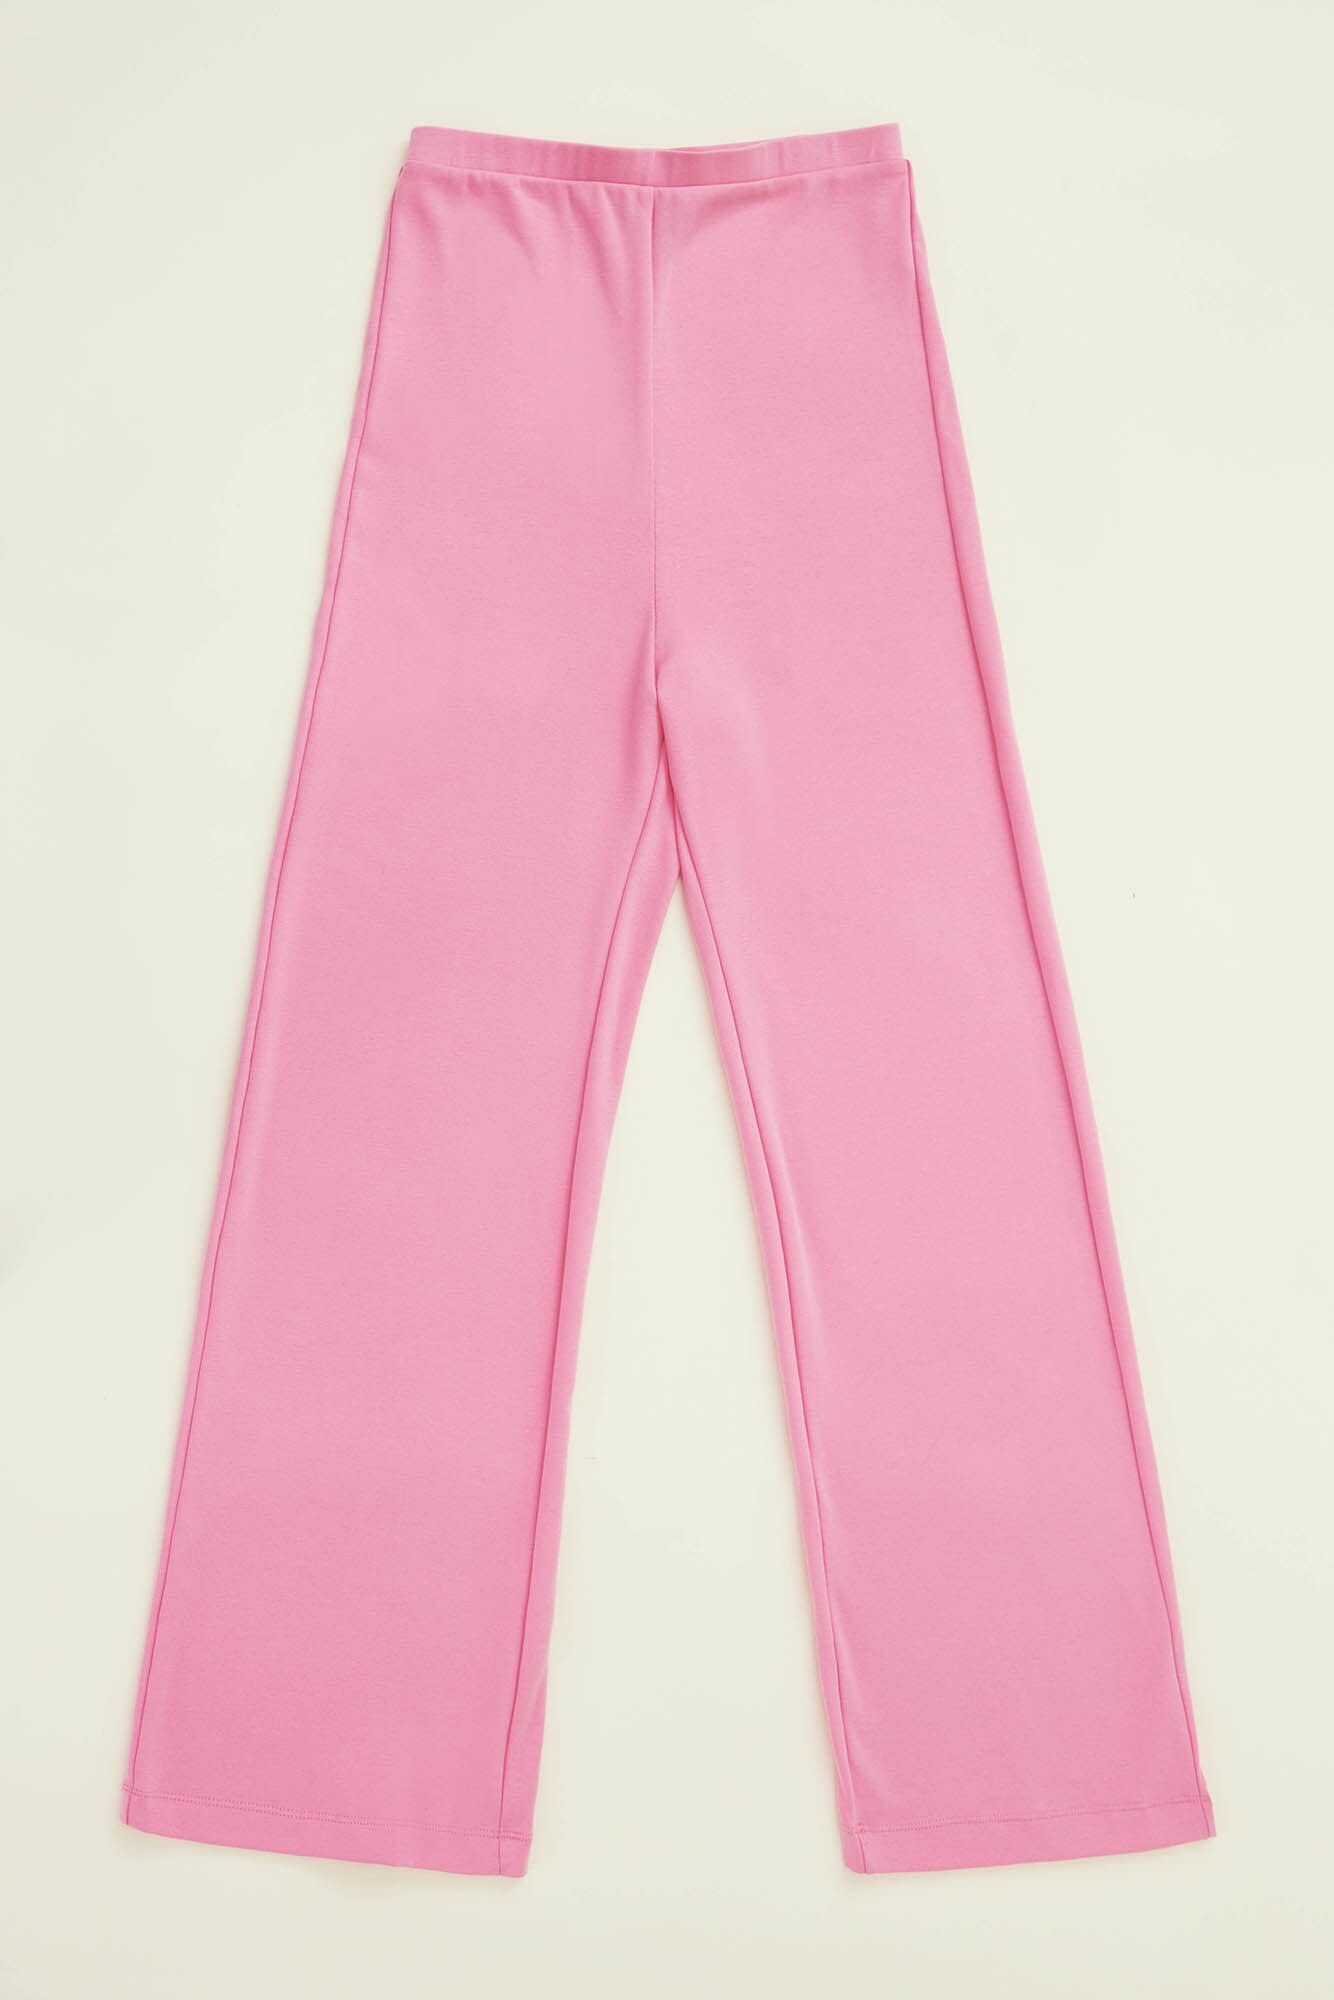 Pink Zahra Over Belly Maternity Pant by M Street